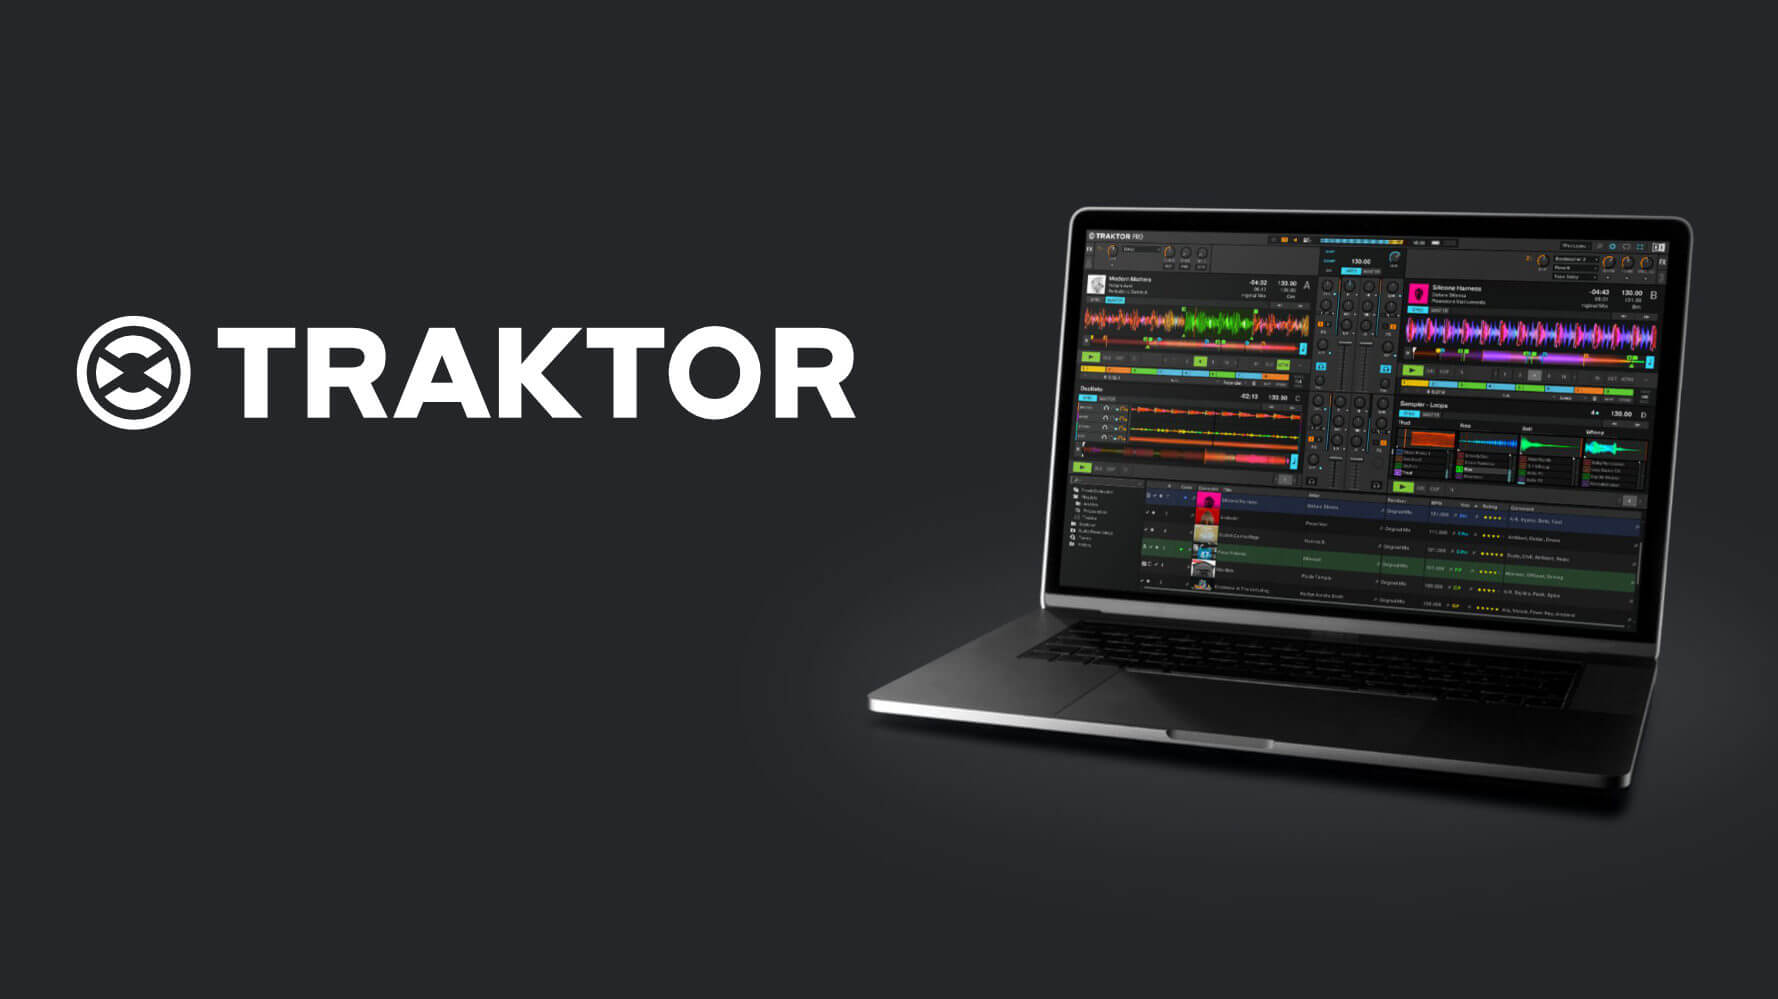 Getting Started with Traktor edited